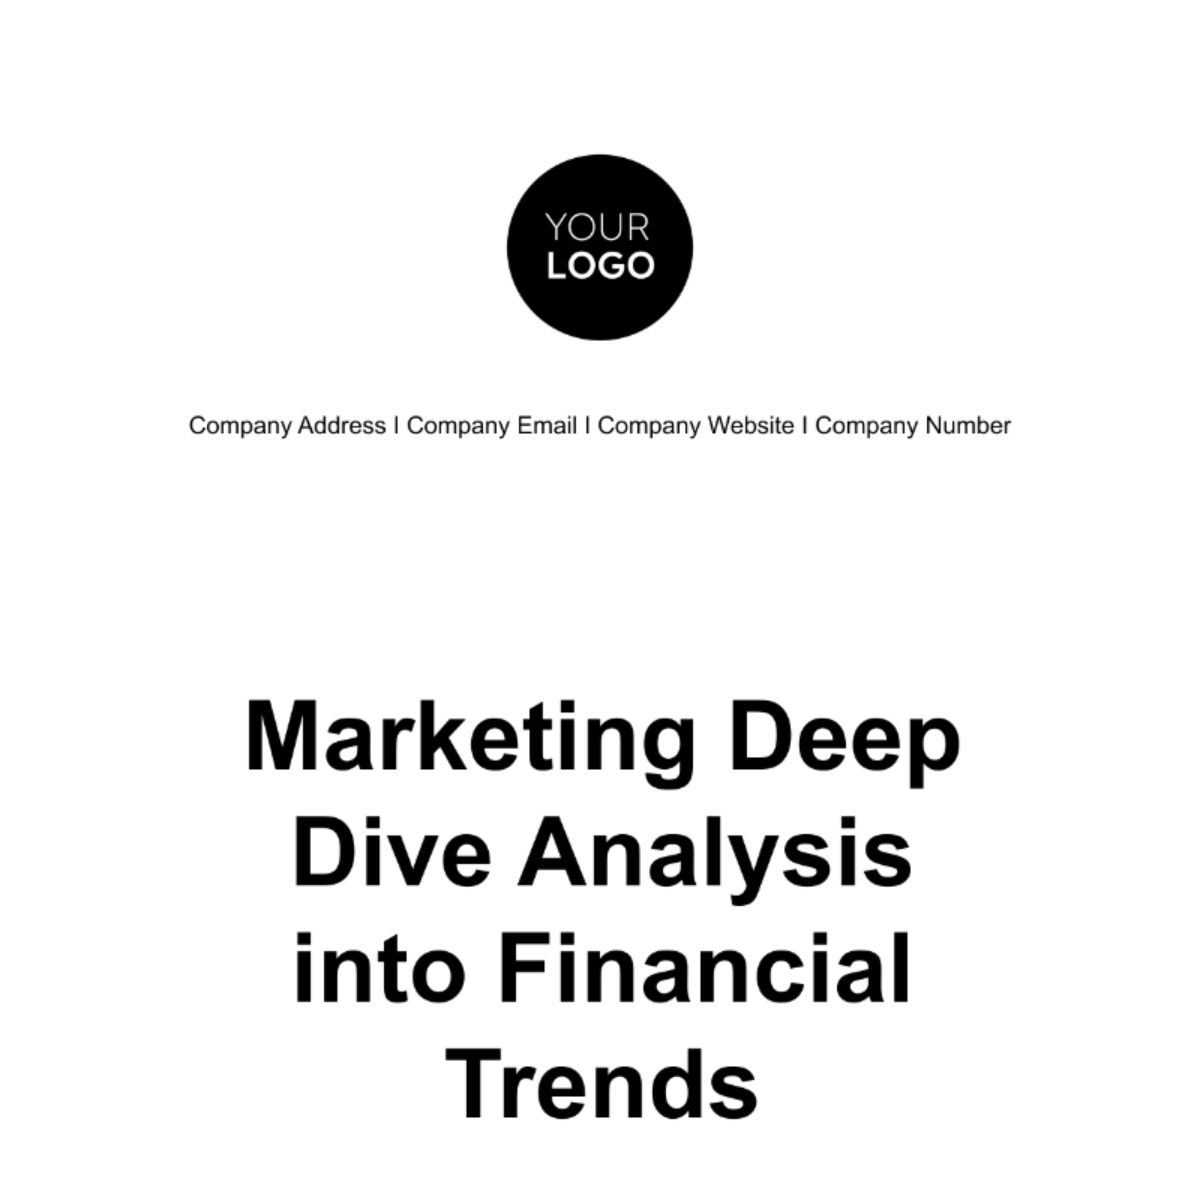 Free Marketing Deep Dive Analysis into Financial Trends Template